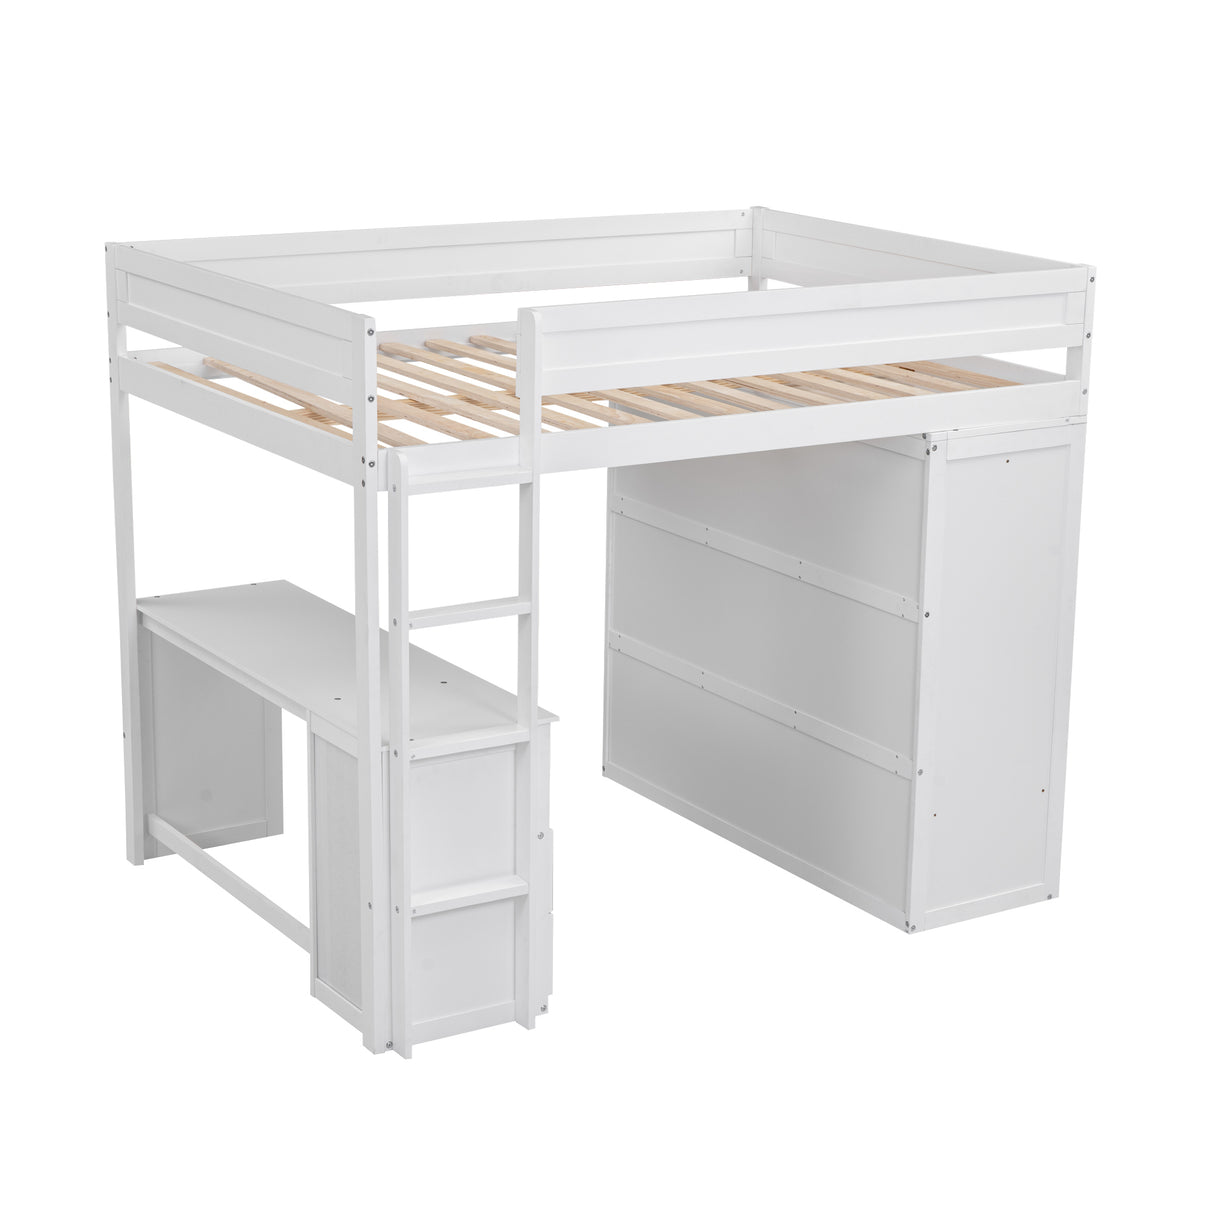 Wood Full Size Loft Bed with Wardrobes and 2-Drawer Desk with Cabinet, White - Home Elegance USA